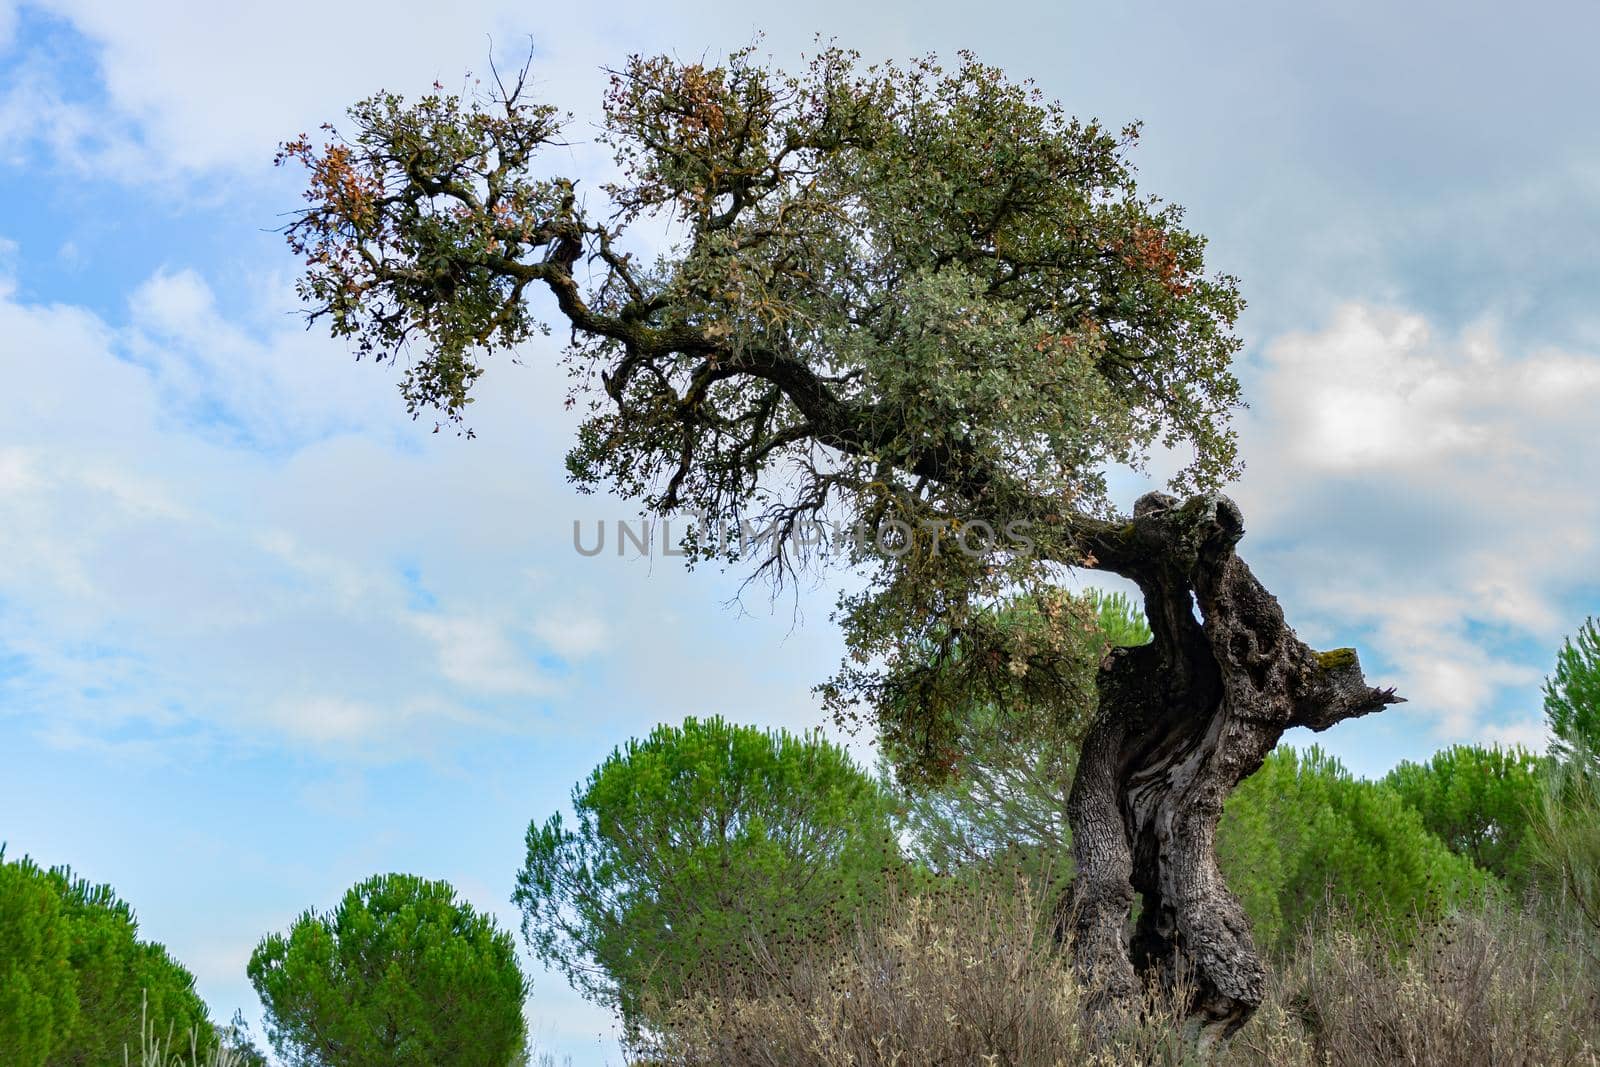 holm oak or Quercus ilex with cloudy sky in the background by joseantona